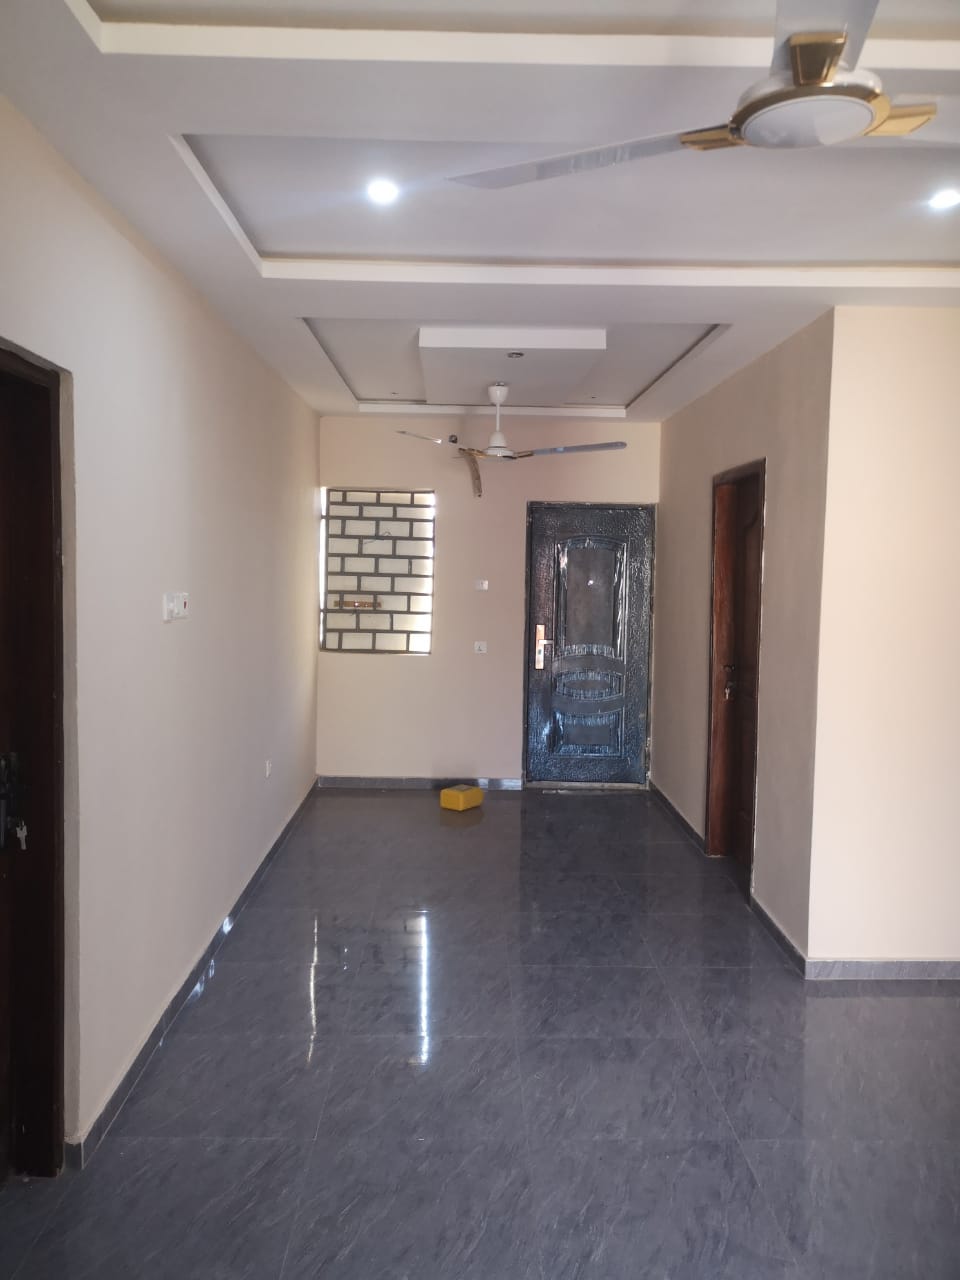 Three 3-Bedroom House for Sale At Gbawe